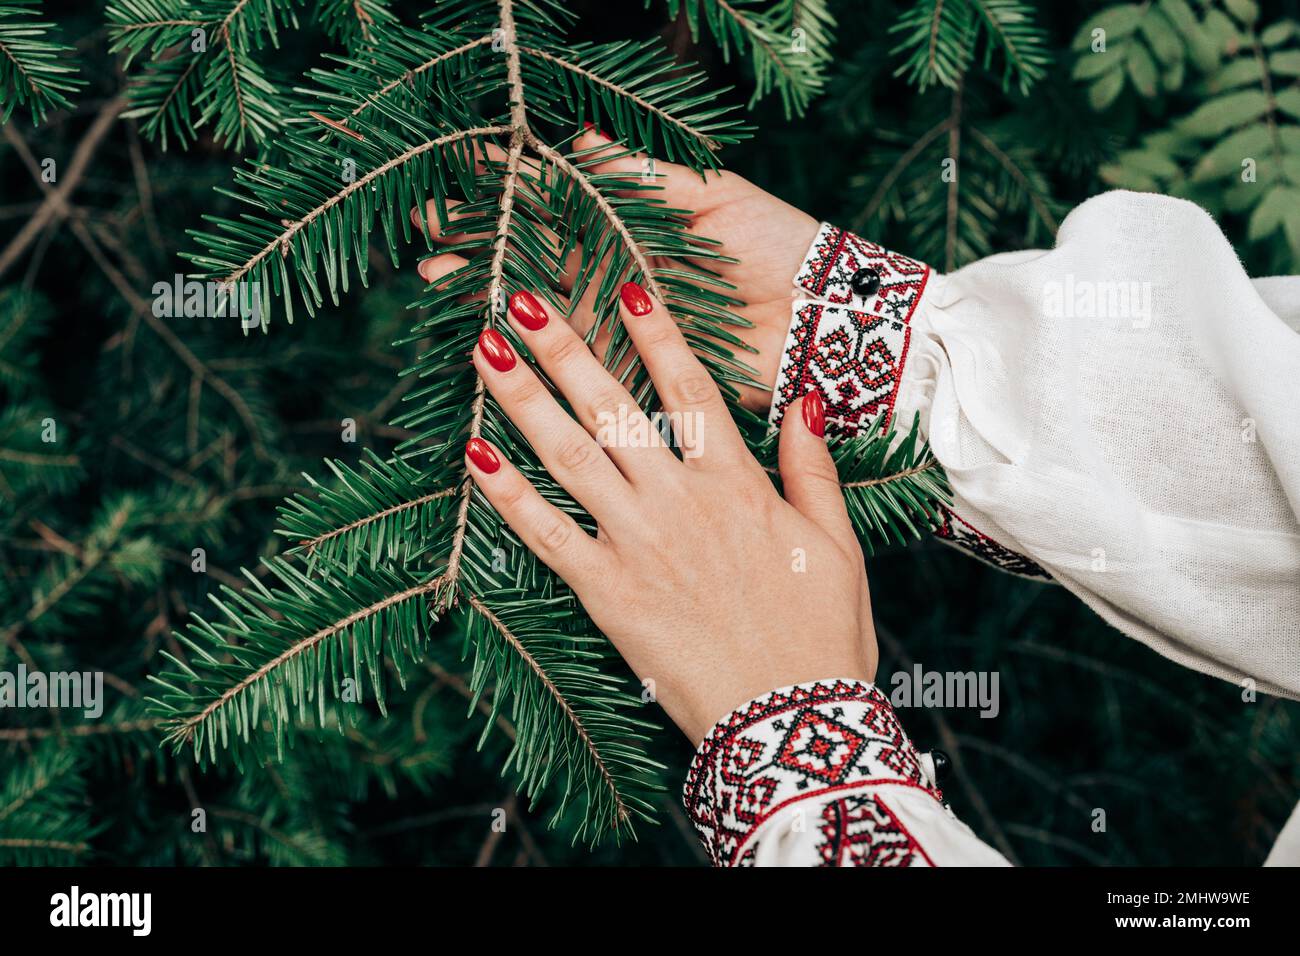 Woman's hand in embroidered ukrainian dress stroking, touching a spruce branch in green forest. High quality photo Stock Photo